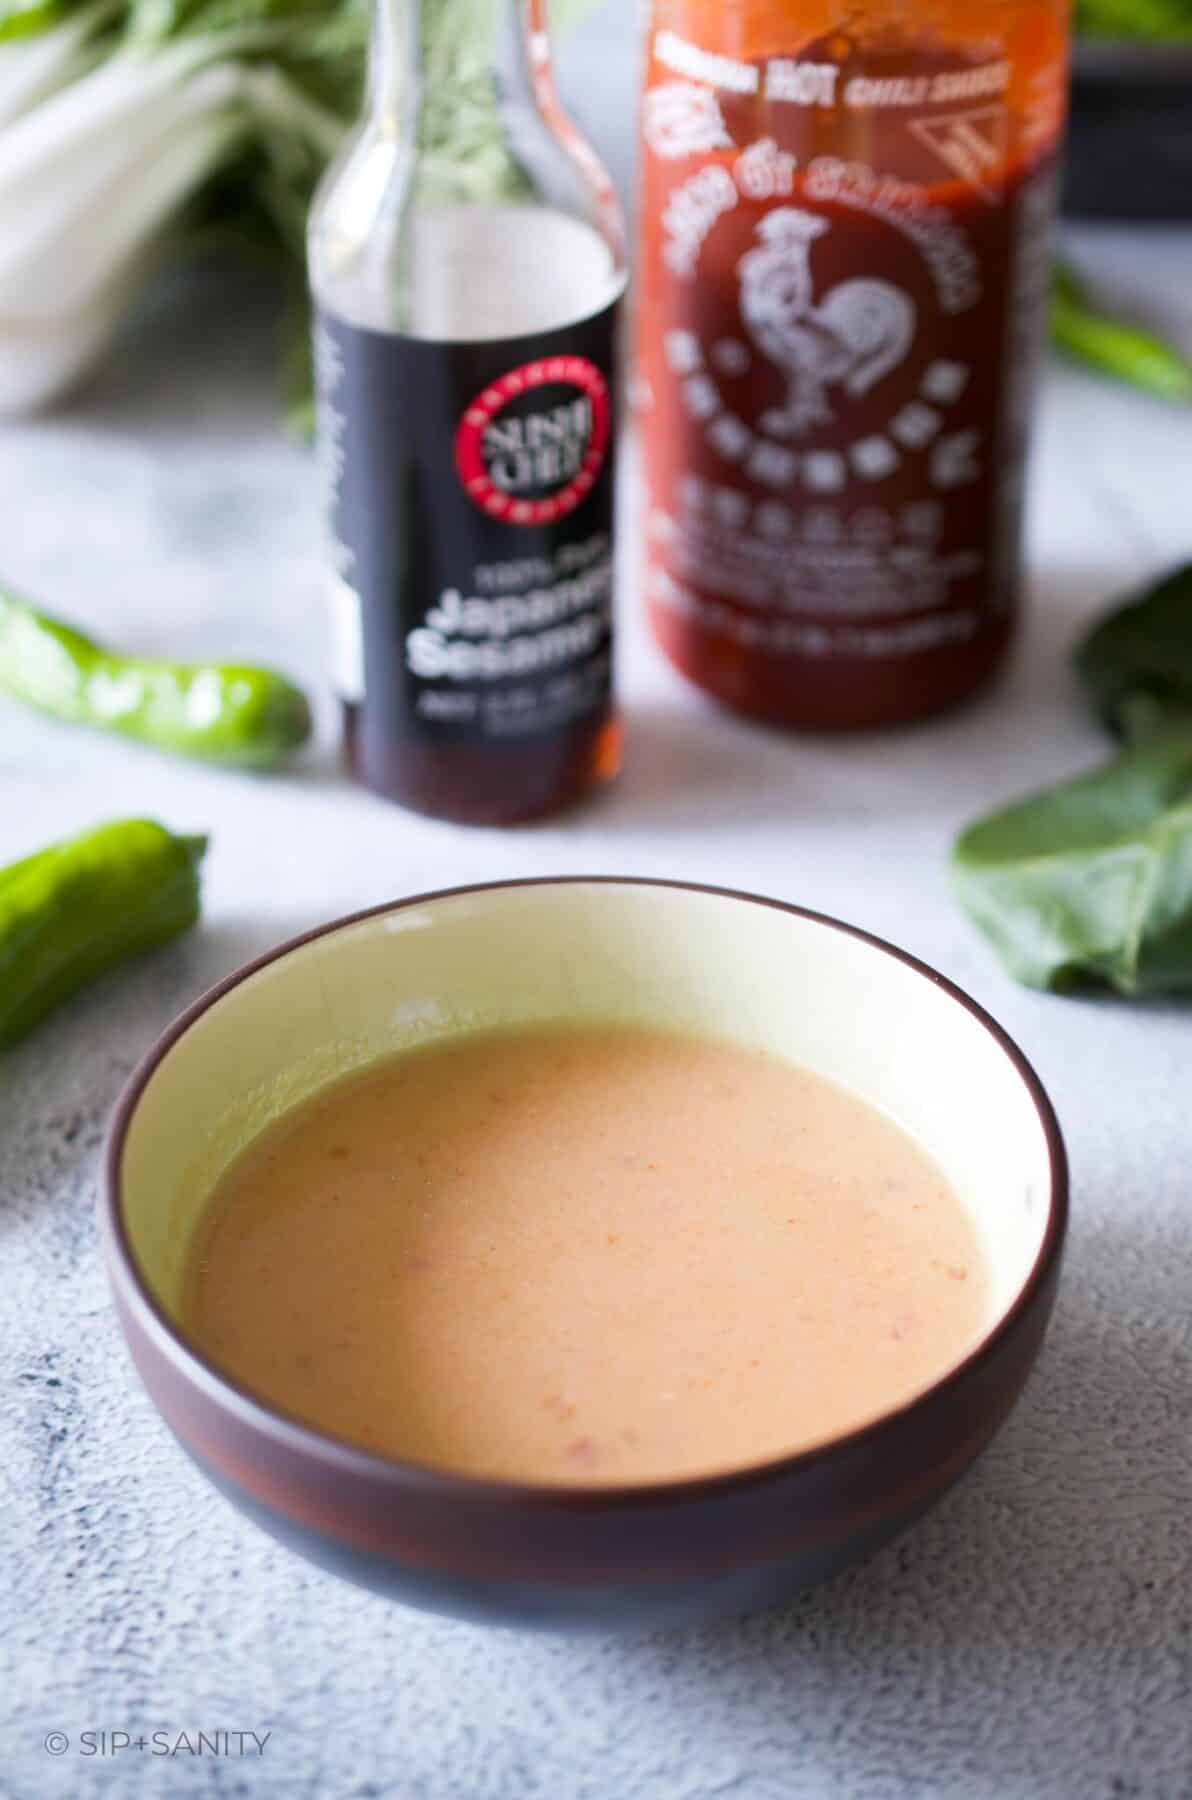 A small bowl of spicy miso finishing sauce next to bottles of sesame oil and sriracha hot sauce.